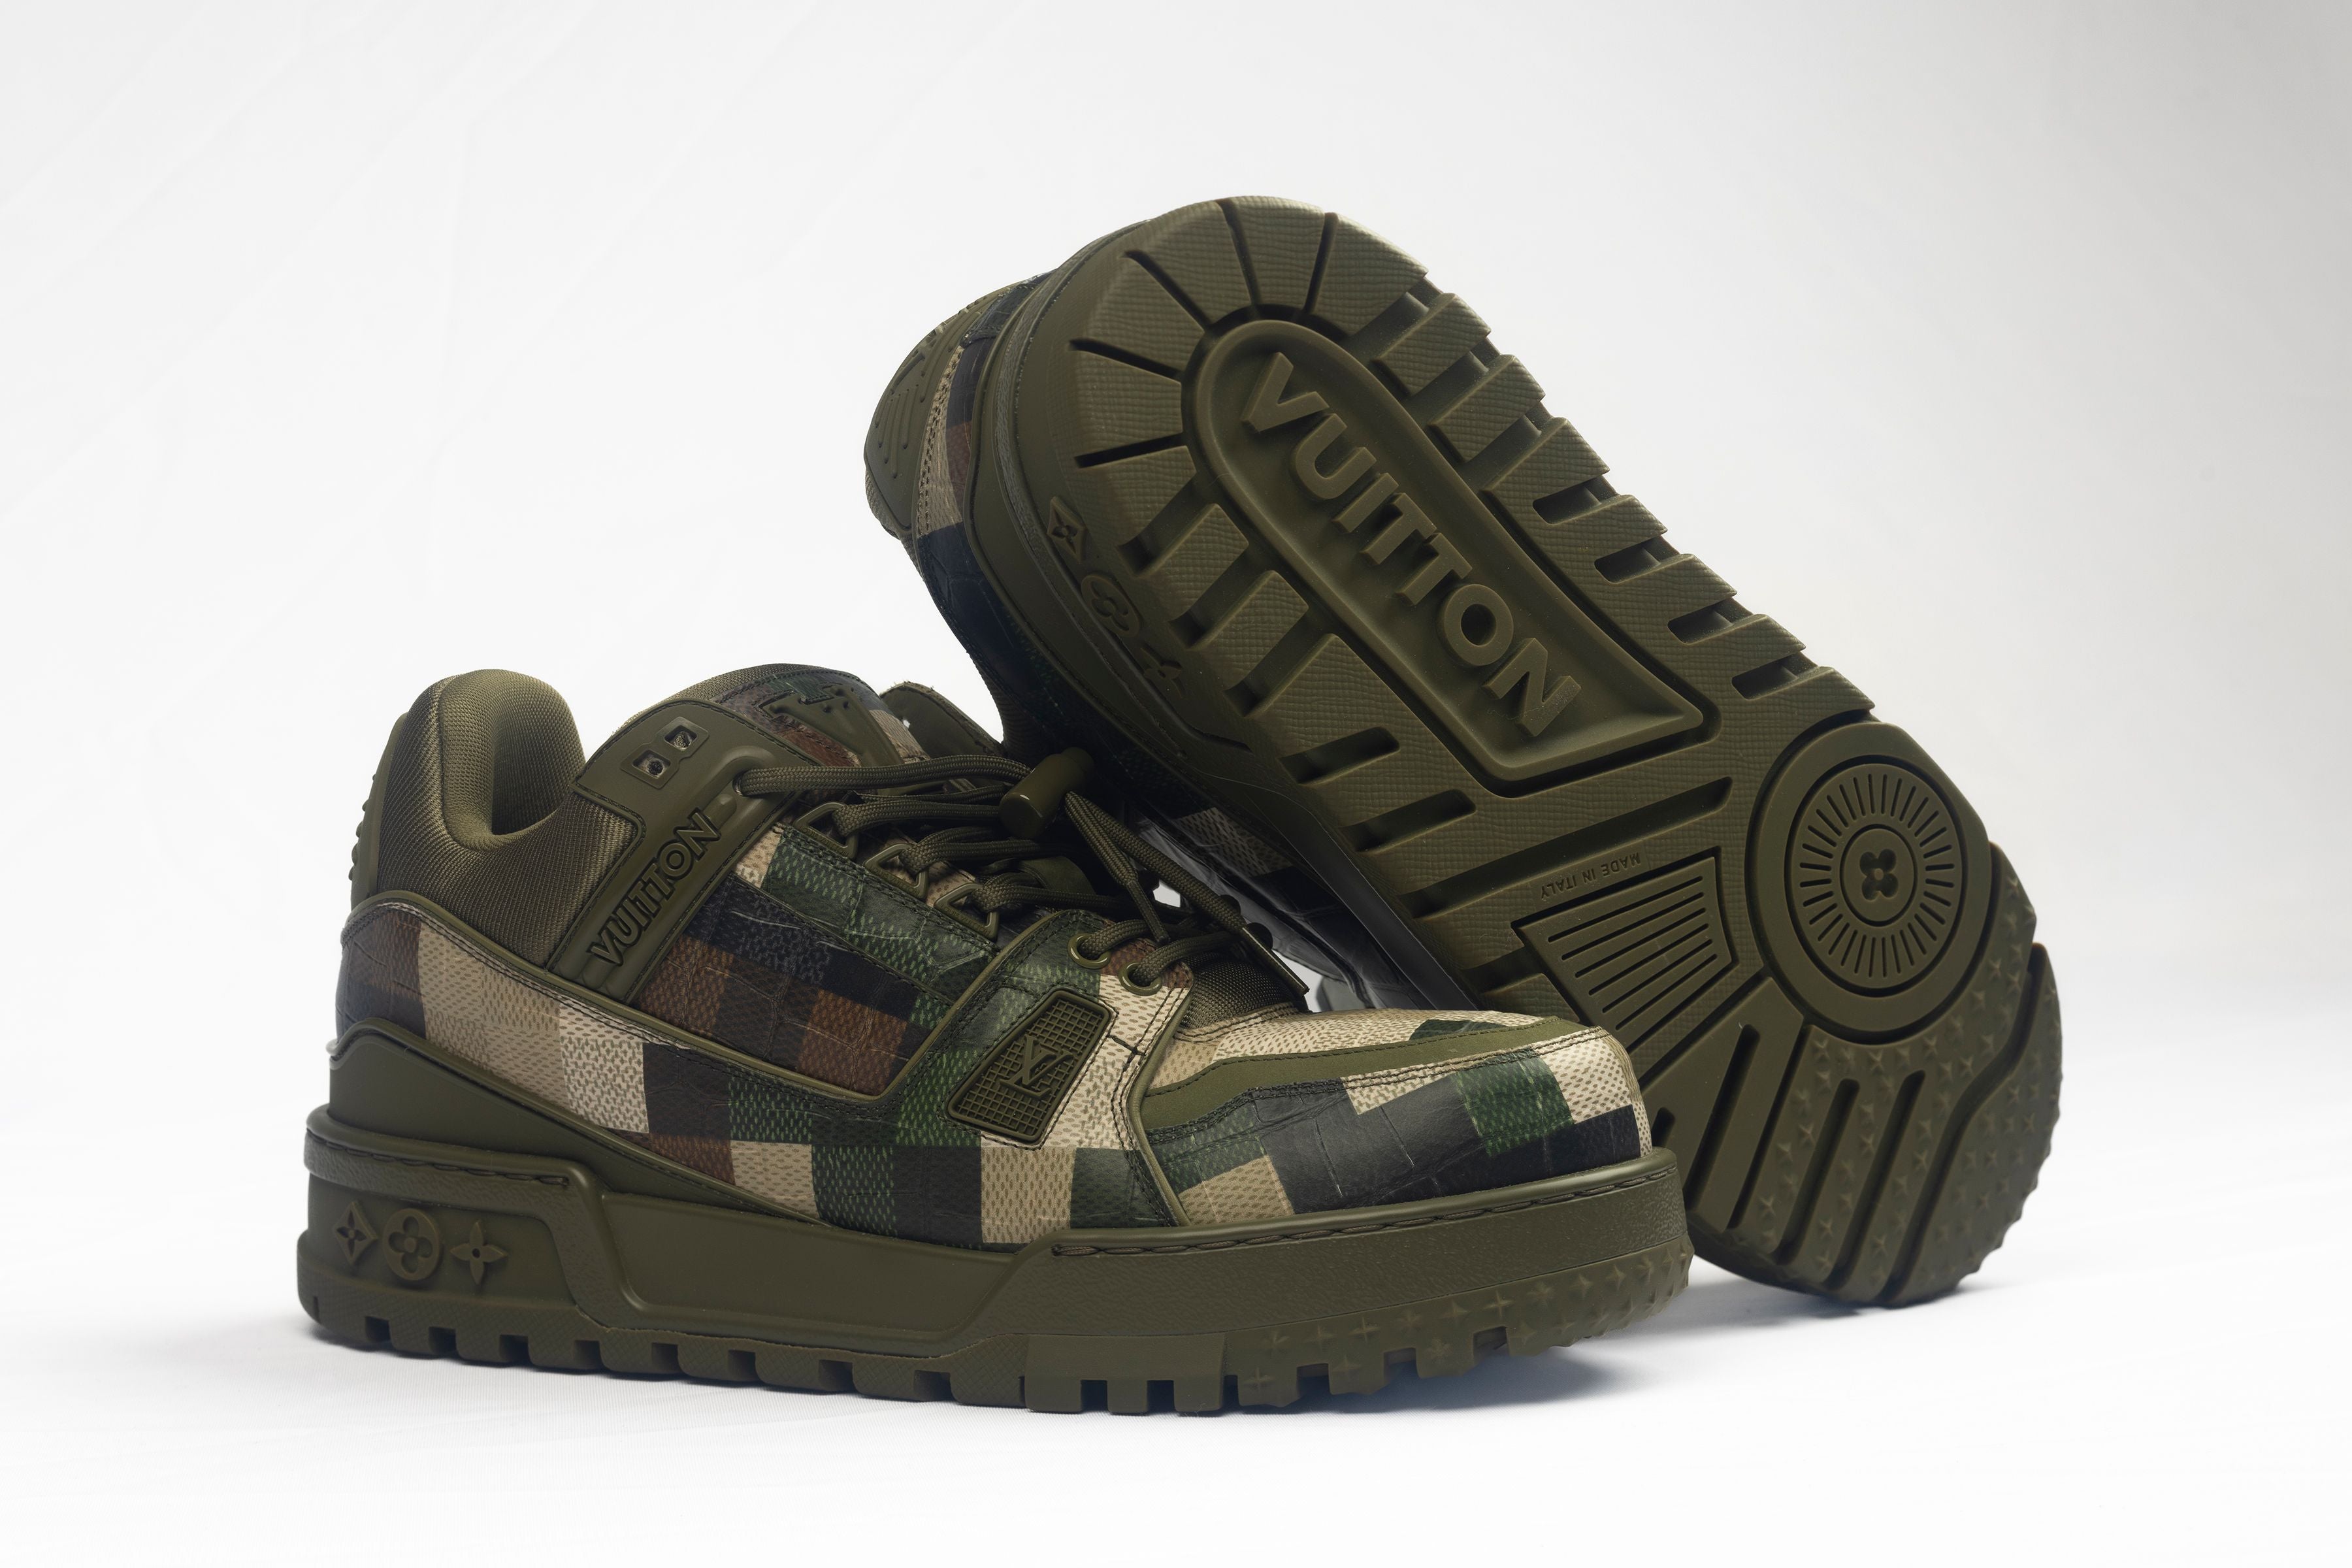 Outsole image of the Louis Vuitton Trainer Maxi Sneaker